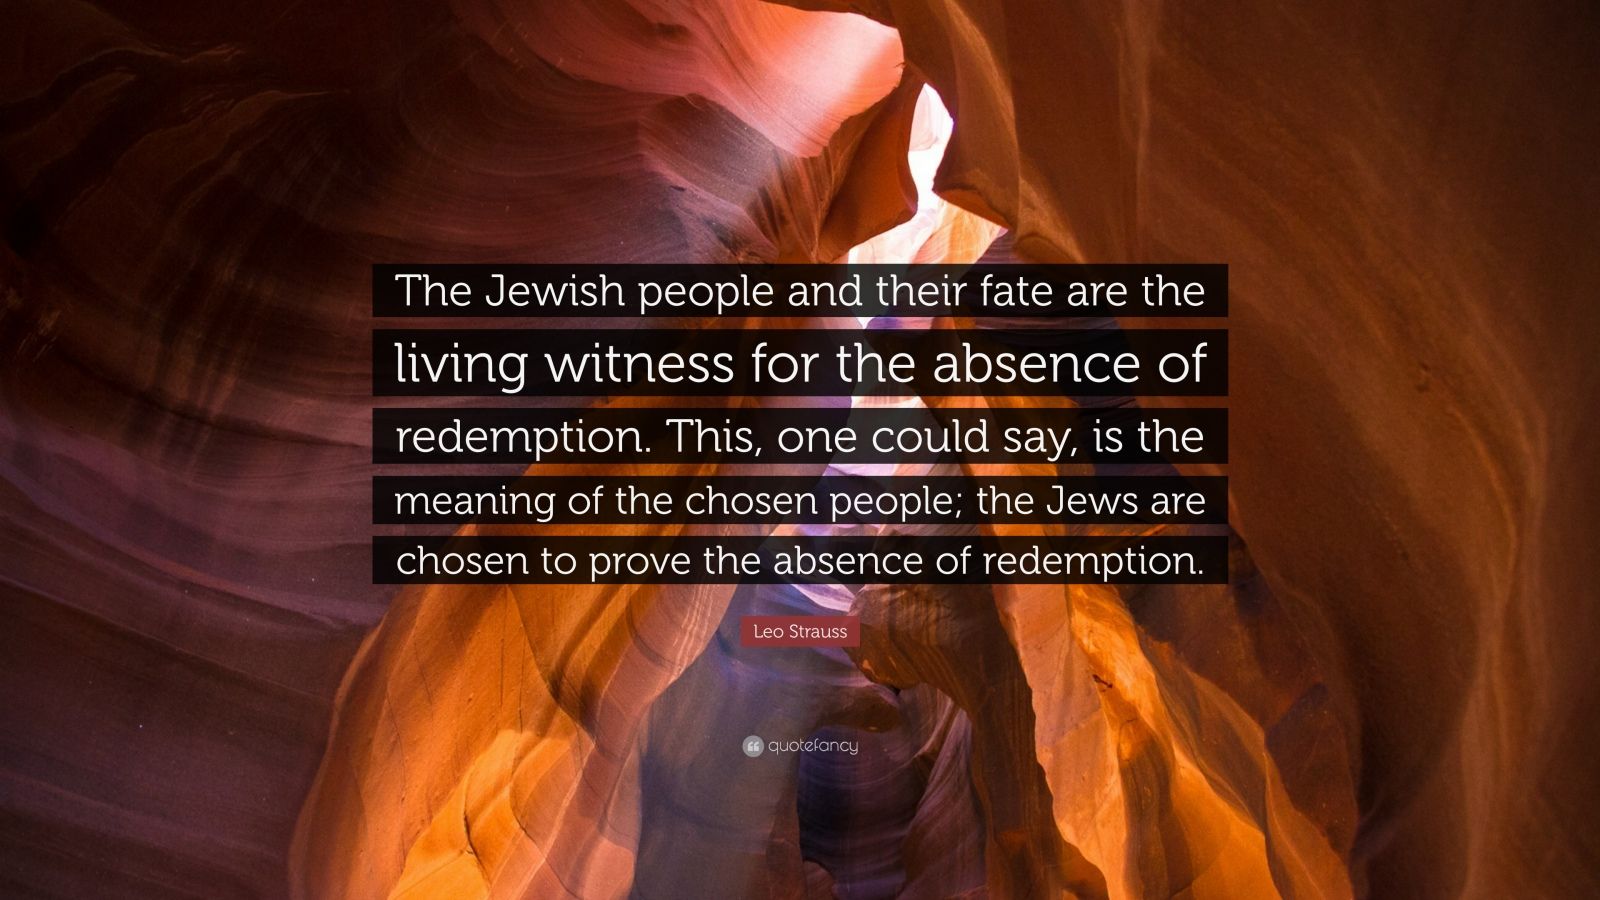 Leo Strauss Quote: “The Jewish people and their fate are the living witness  for the absence of redemption. This, one could say, is the meani”